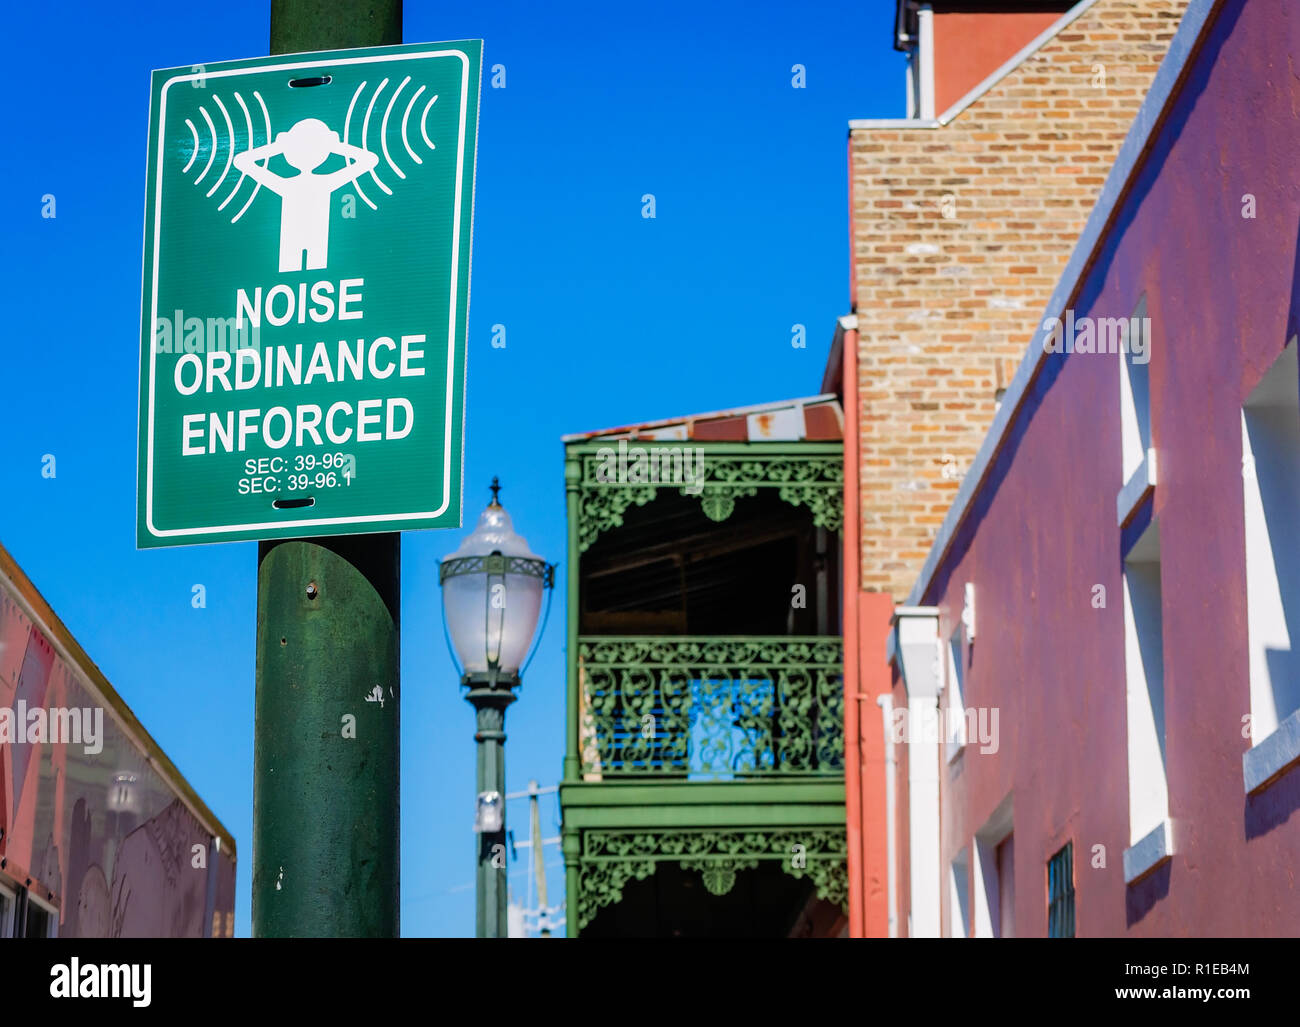 A noise ordinance enforcement sign is pictured on Dauphin Street, Nov. 3, 2018, in Mobile, Alabama. Stock Photo